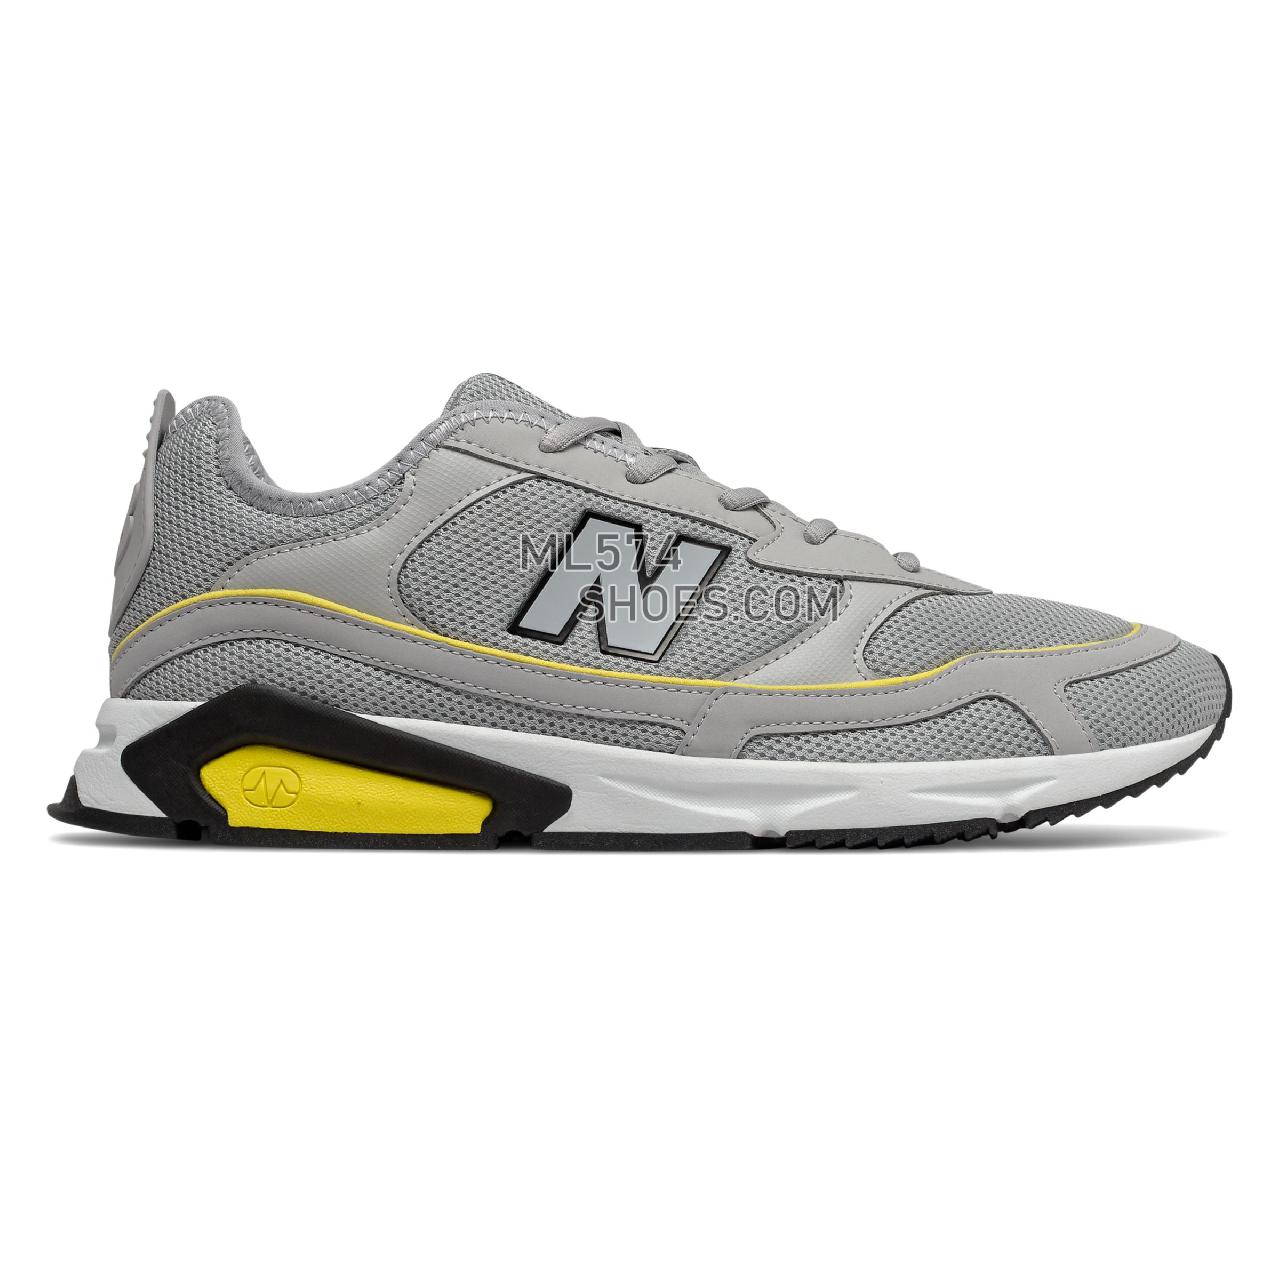 New Balance X-RACER - Men's Classic Sneakers - Rain Cloud with Atomic Yellow - MSXRCNF